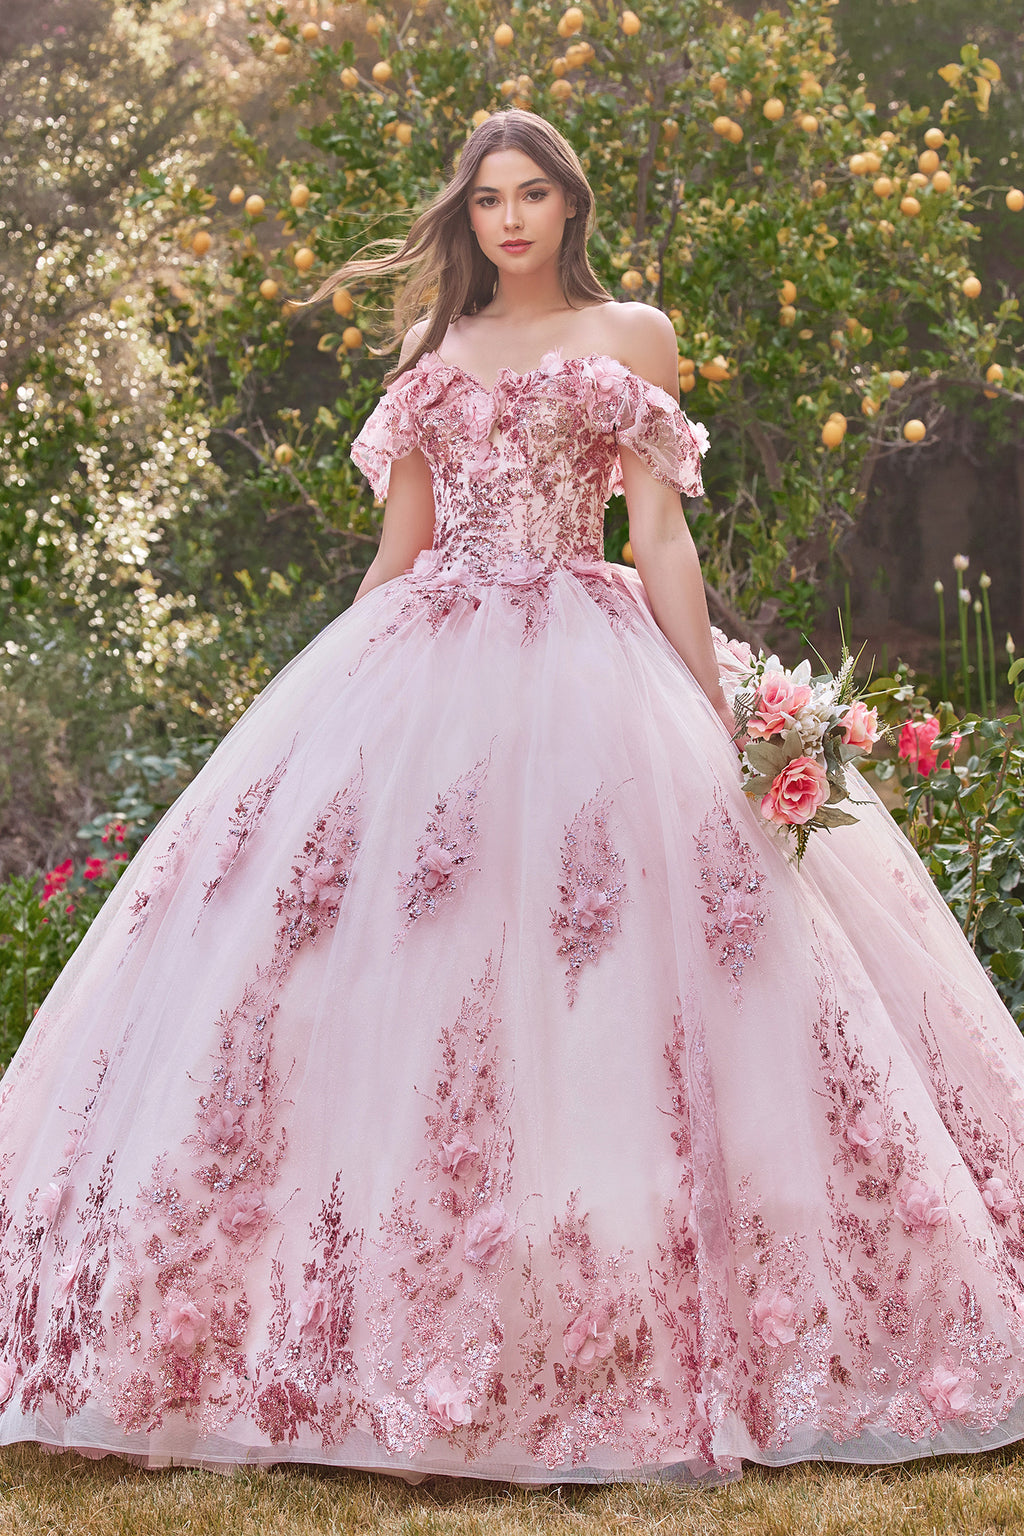 Women's Lace Quinceanera Dresses Ball Gown Sweetheart Quince Dresses with  Sleeves Sweet 15 Dresses